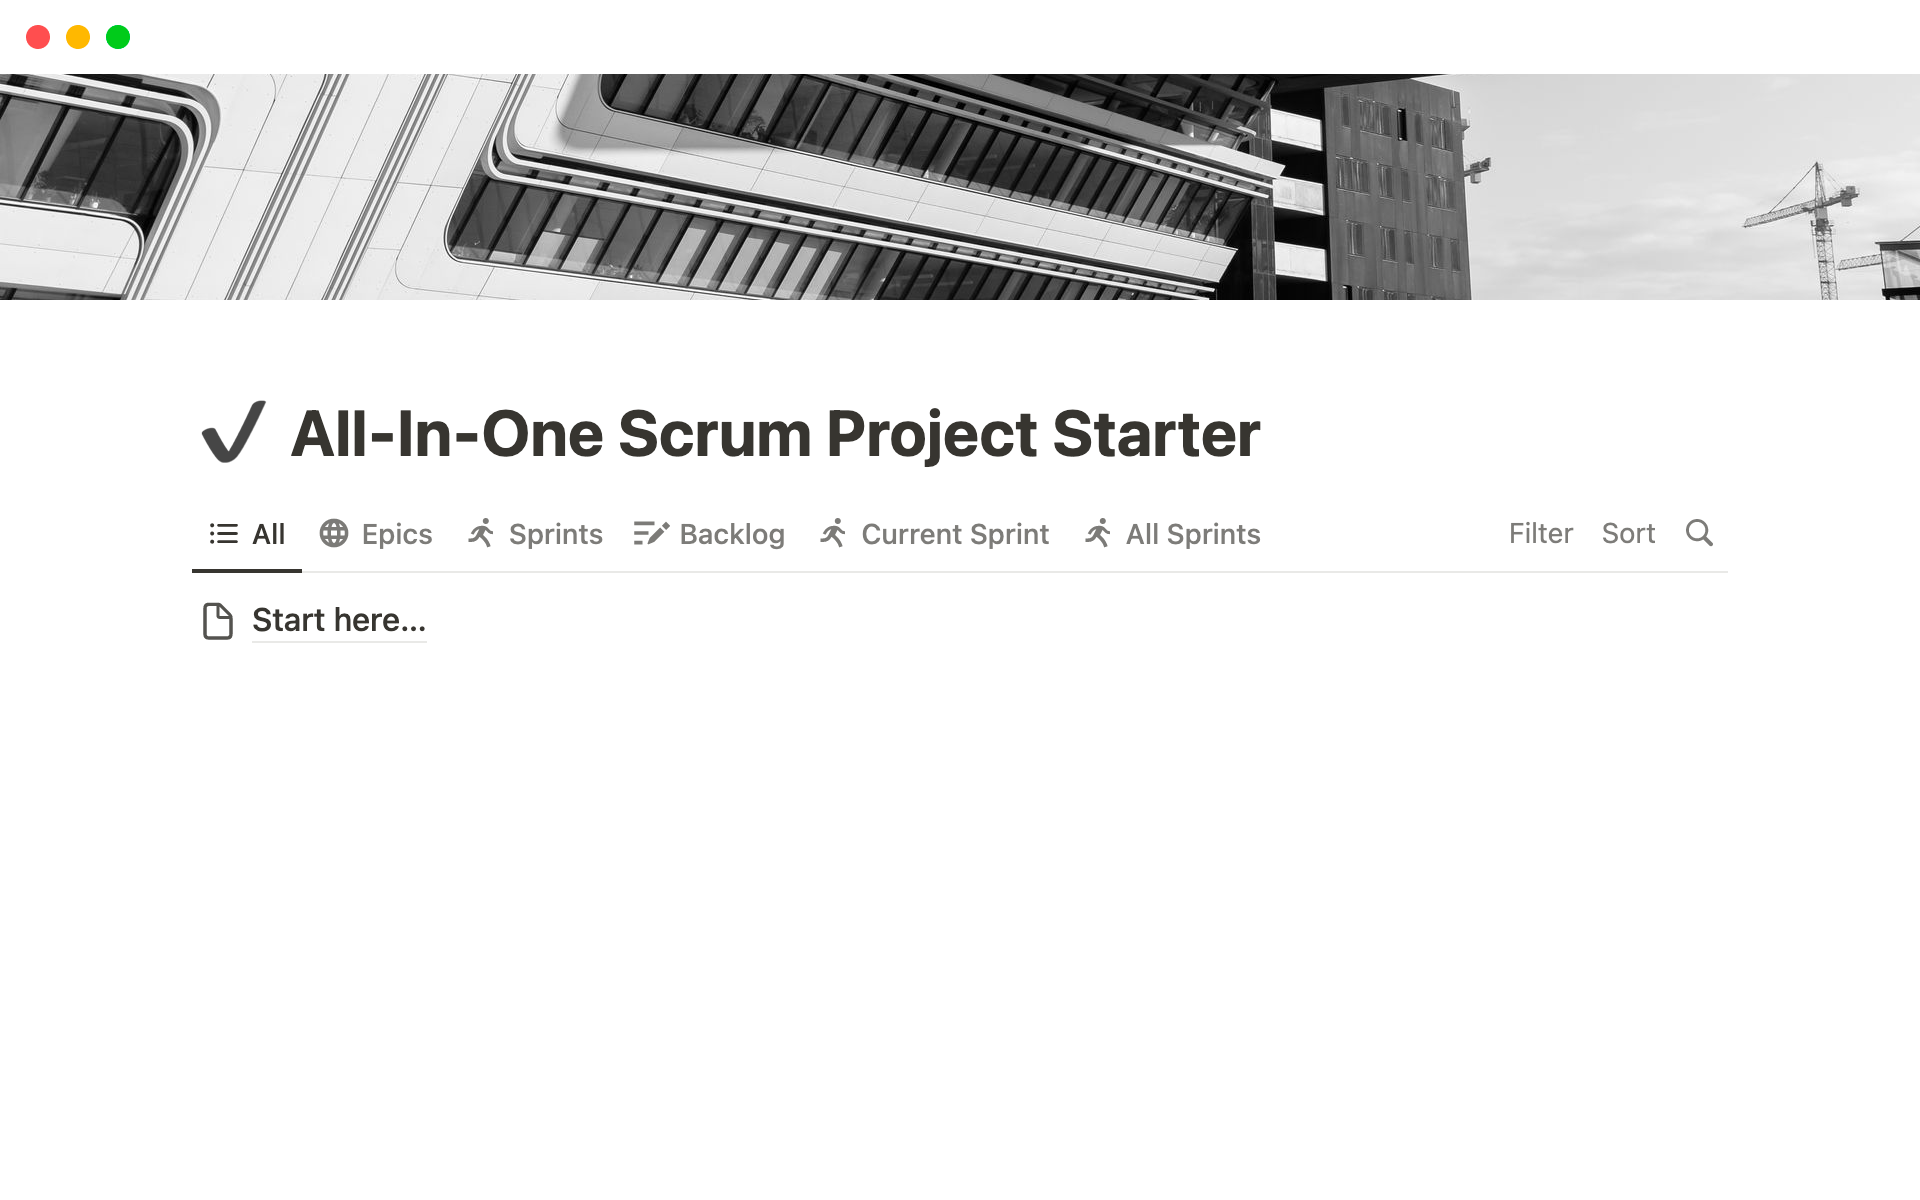 A ready made project management starter kit for high performing Scrum teams.